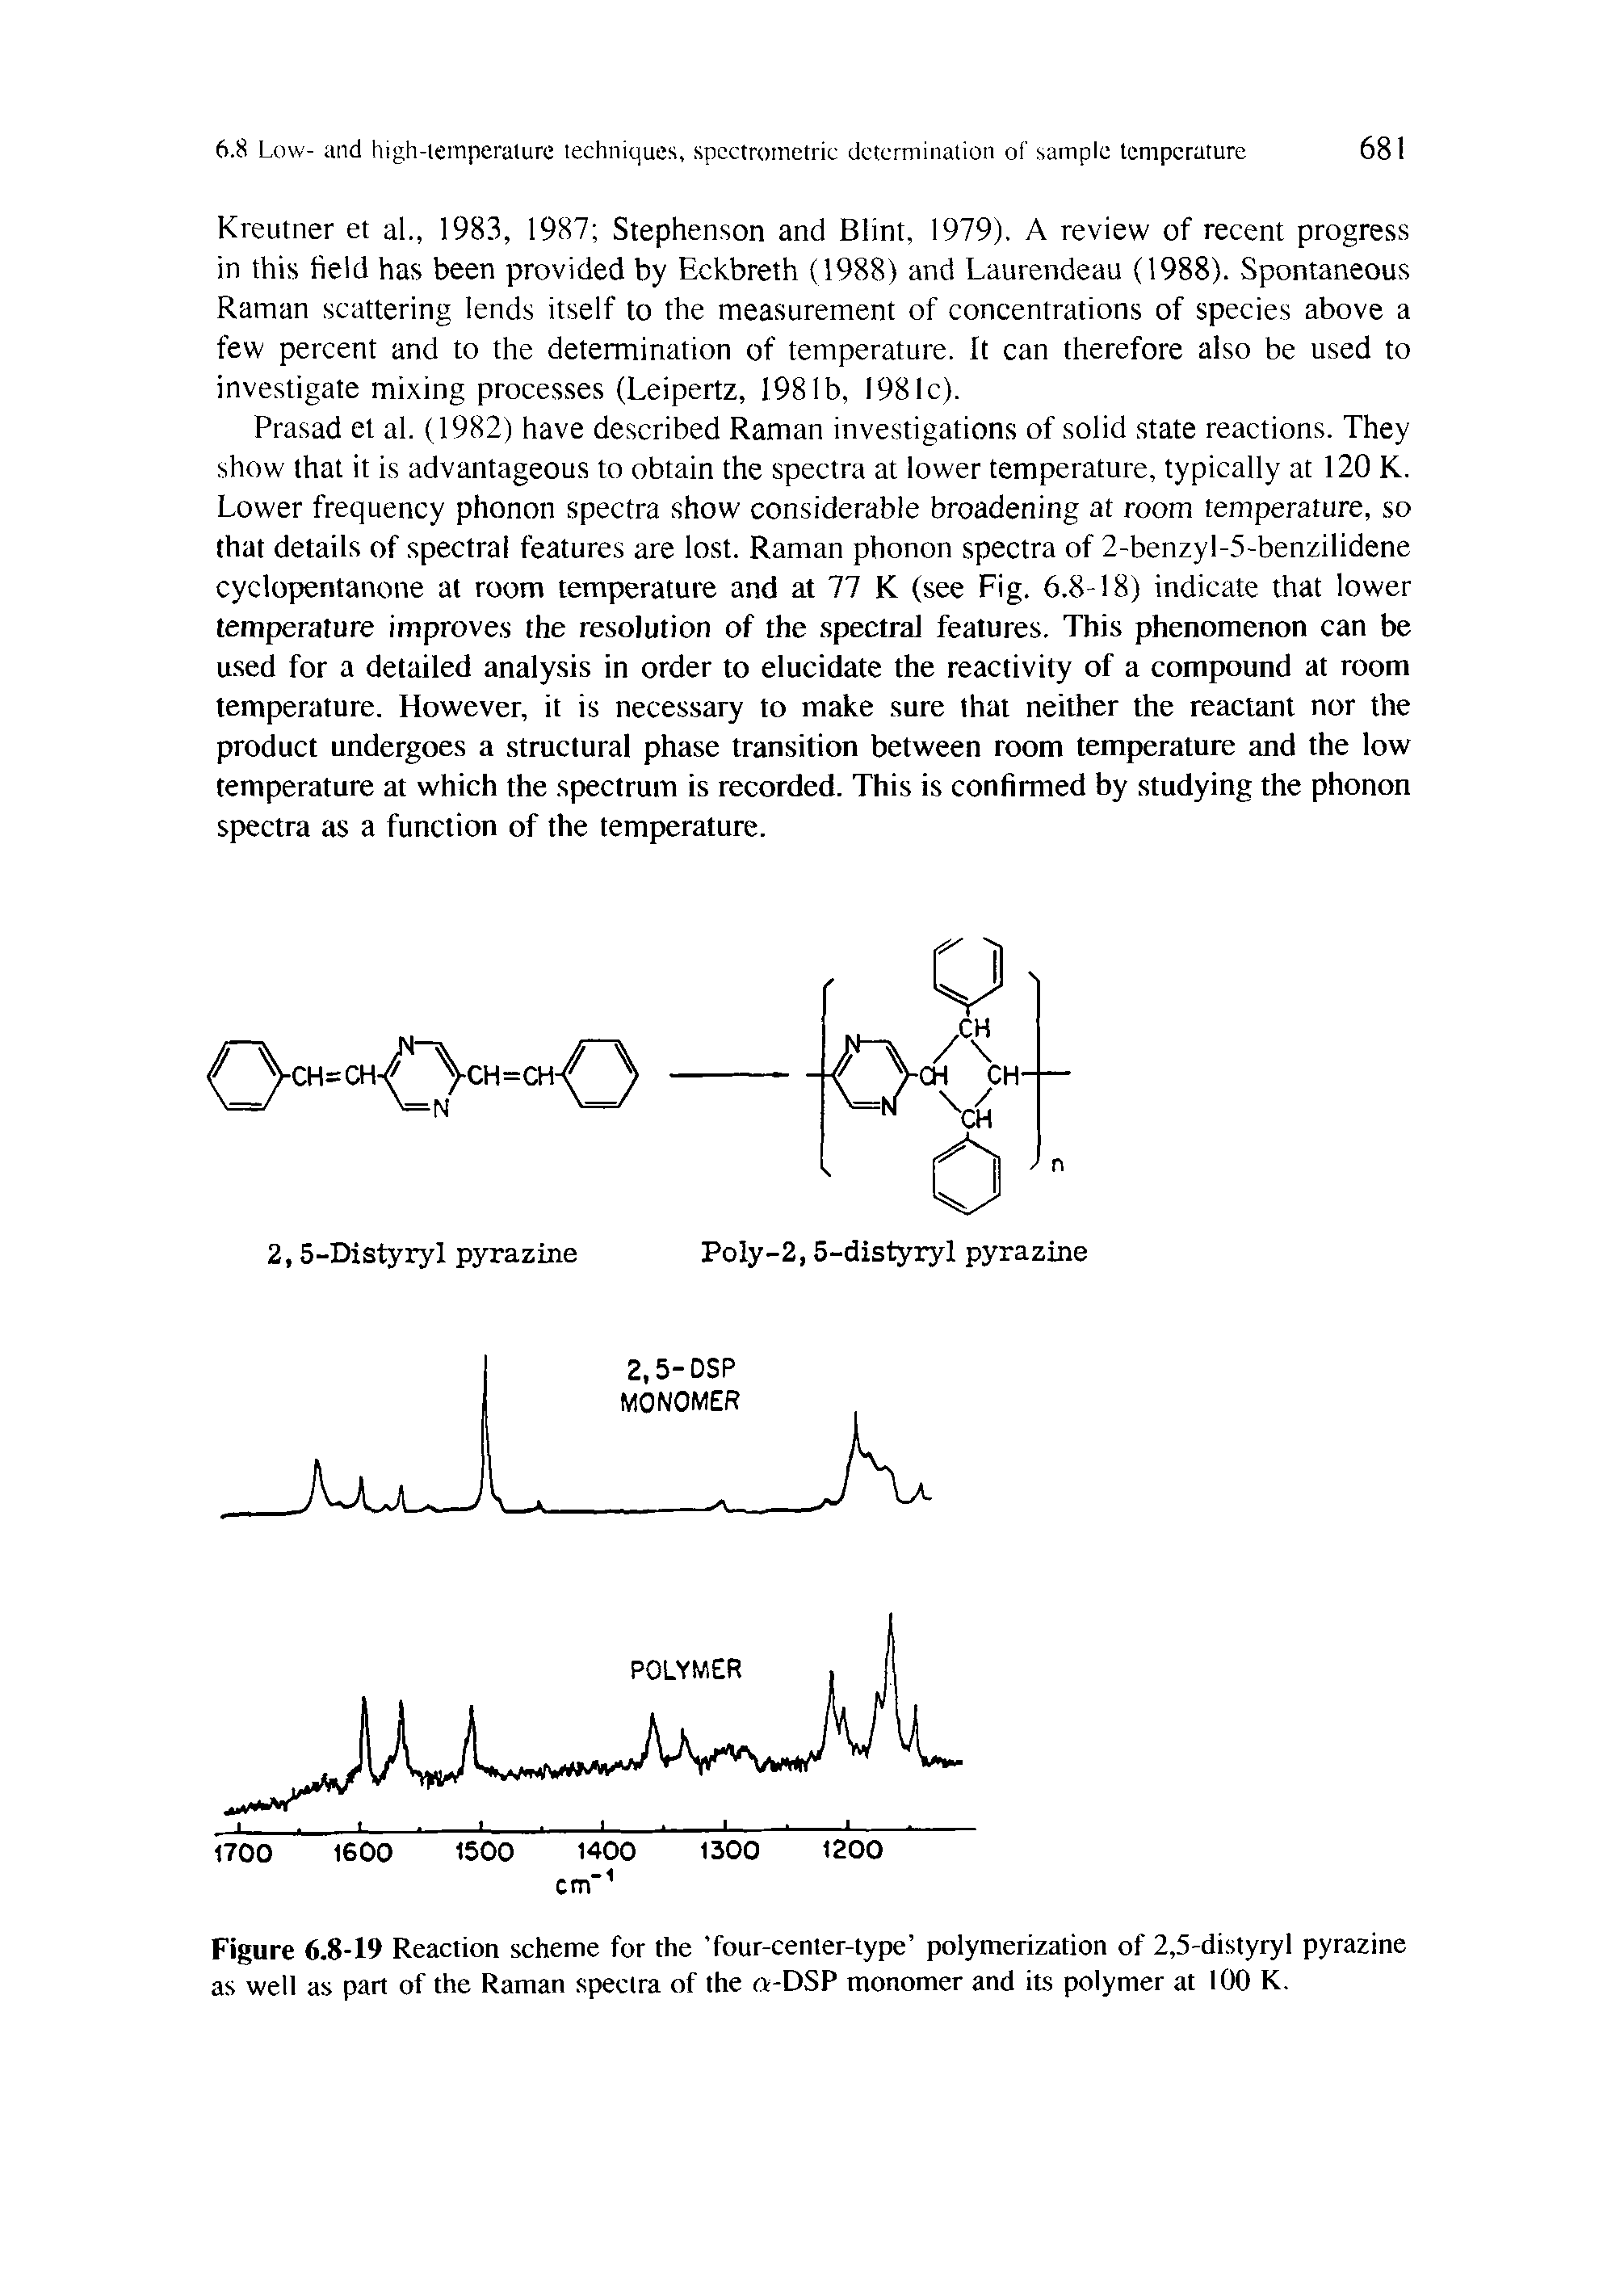 Figure 6.8-19 Reaction scheme for the four-center-type polymerization of 2,5-distyryl pyrazine as well as part of the Raman spectra of the -DSP monomer and its polymer at 100 K.